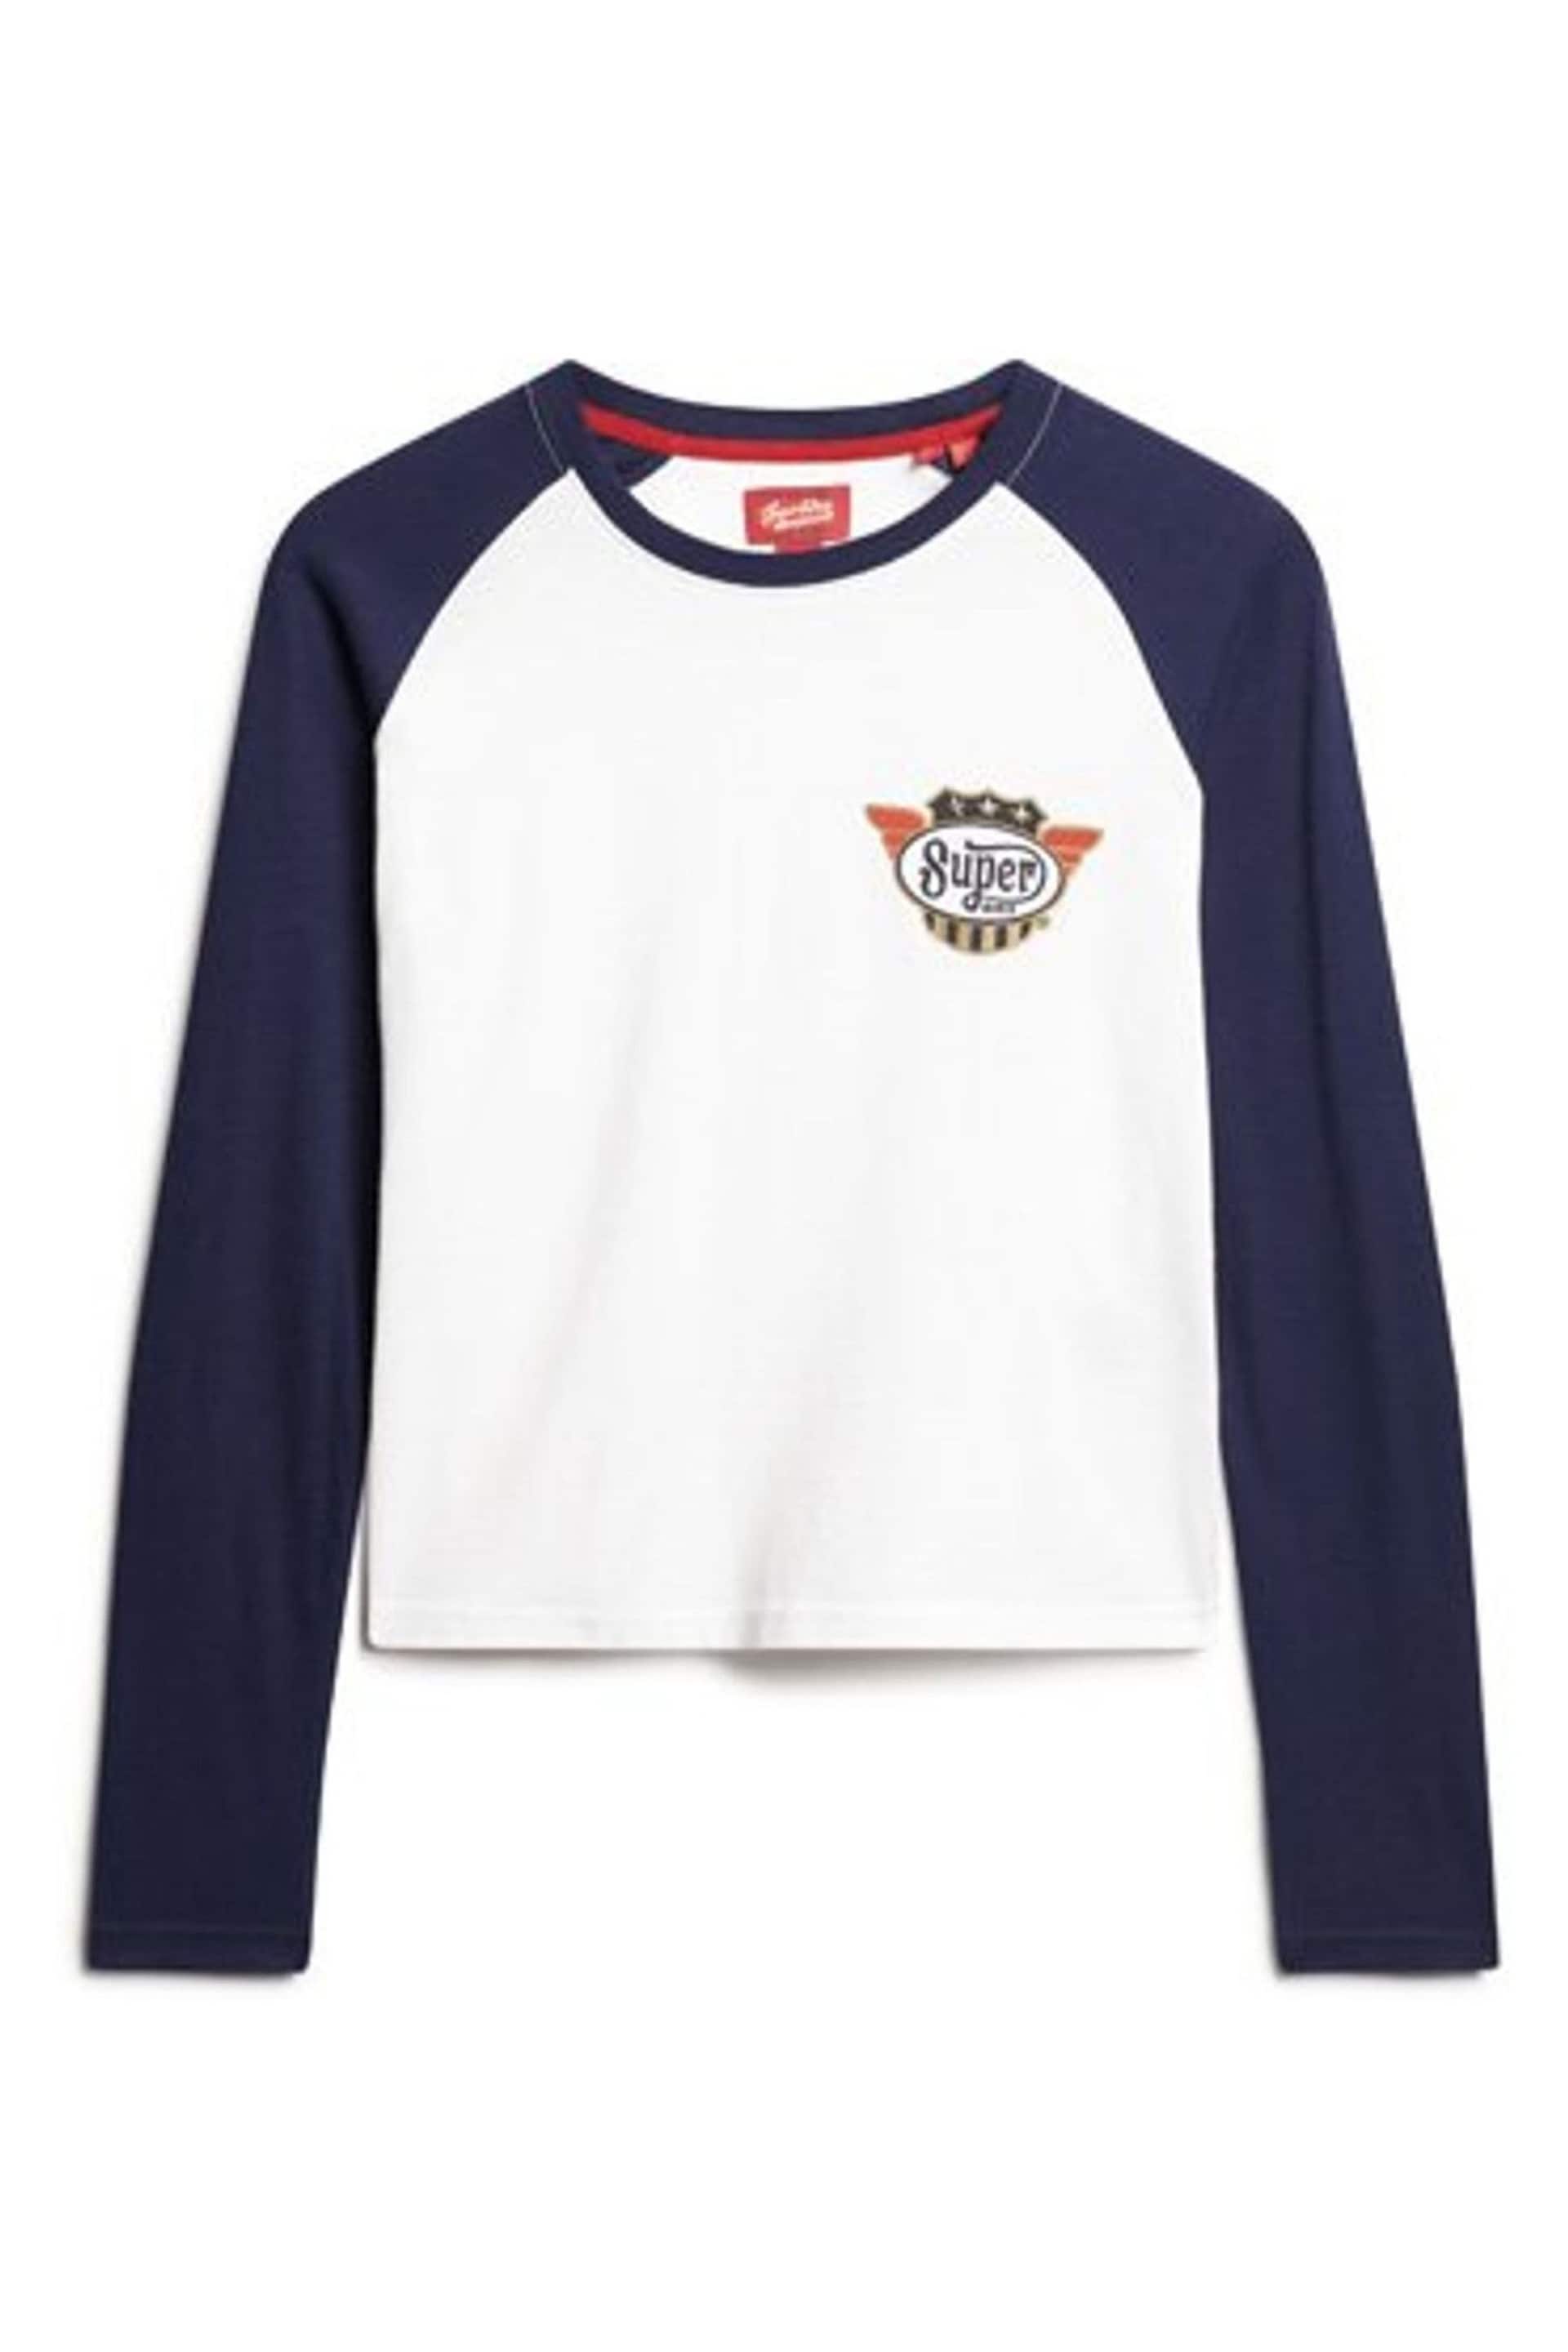 Superdry White Americana Long Sleeve Top - Image 4 of 6